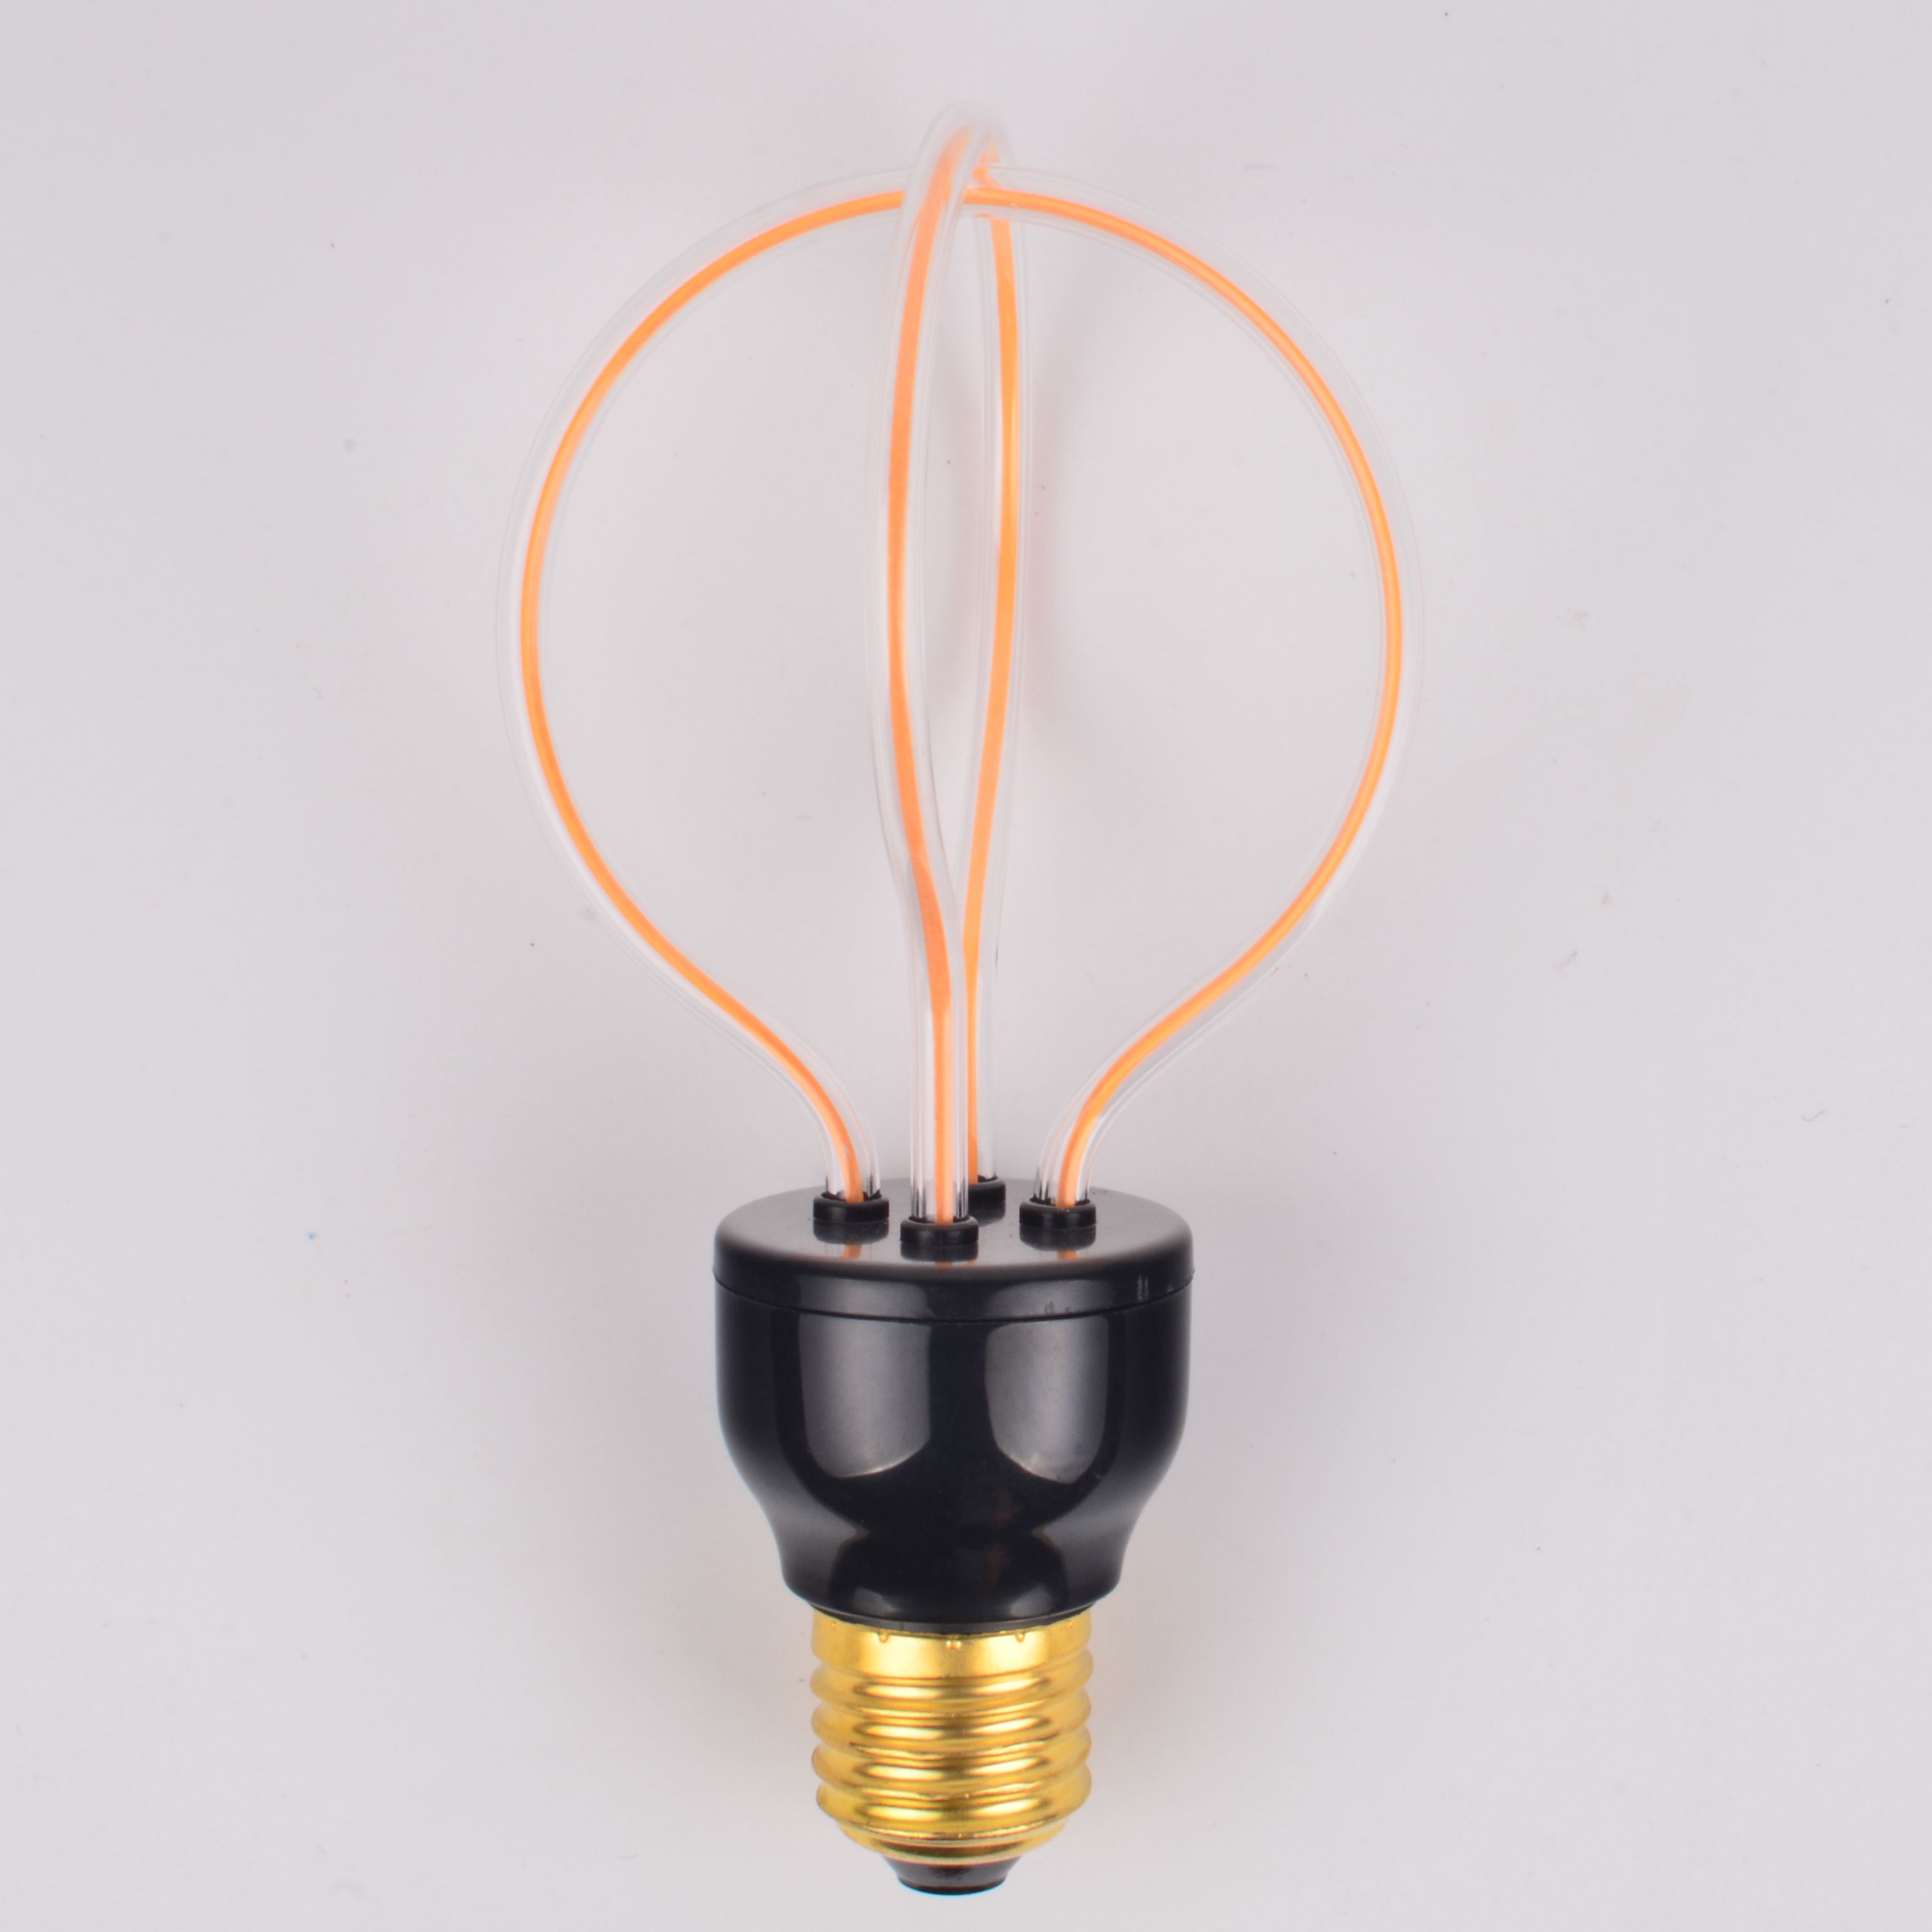 NEW LED filament lamp for decoration